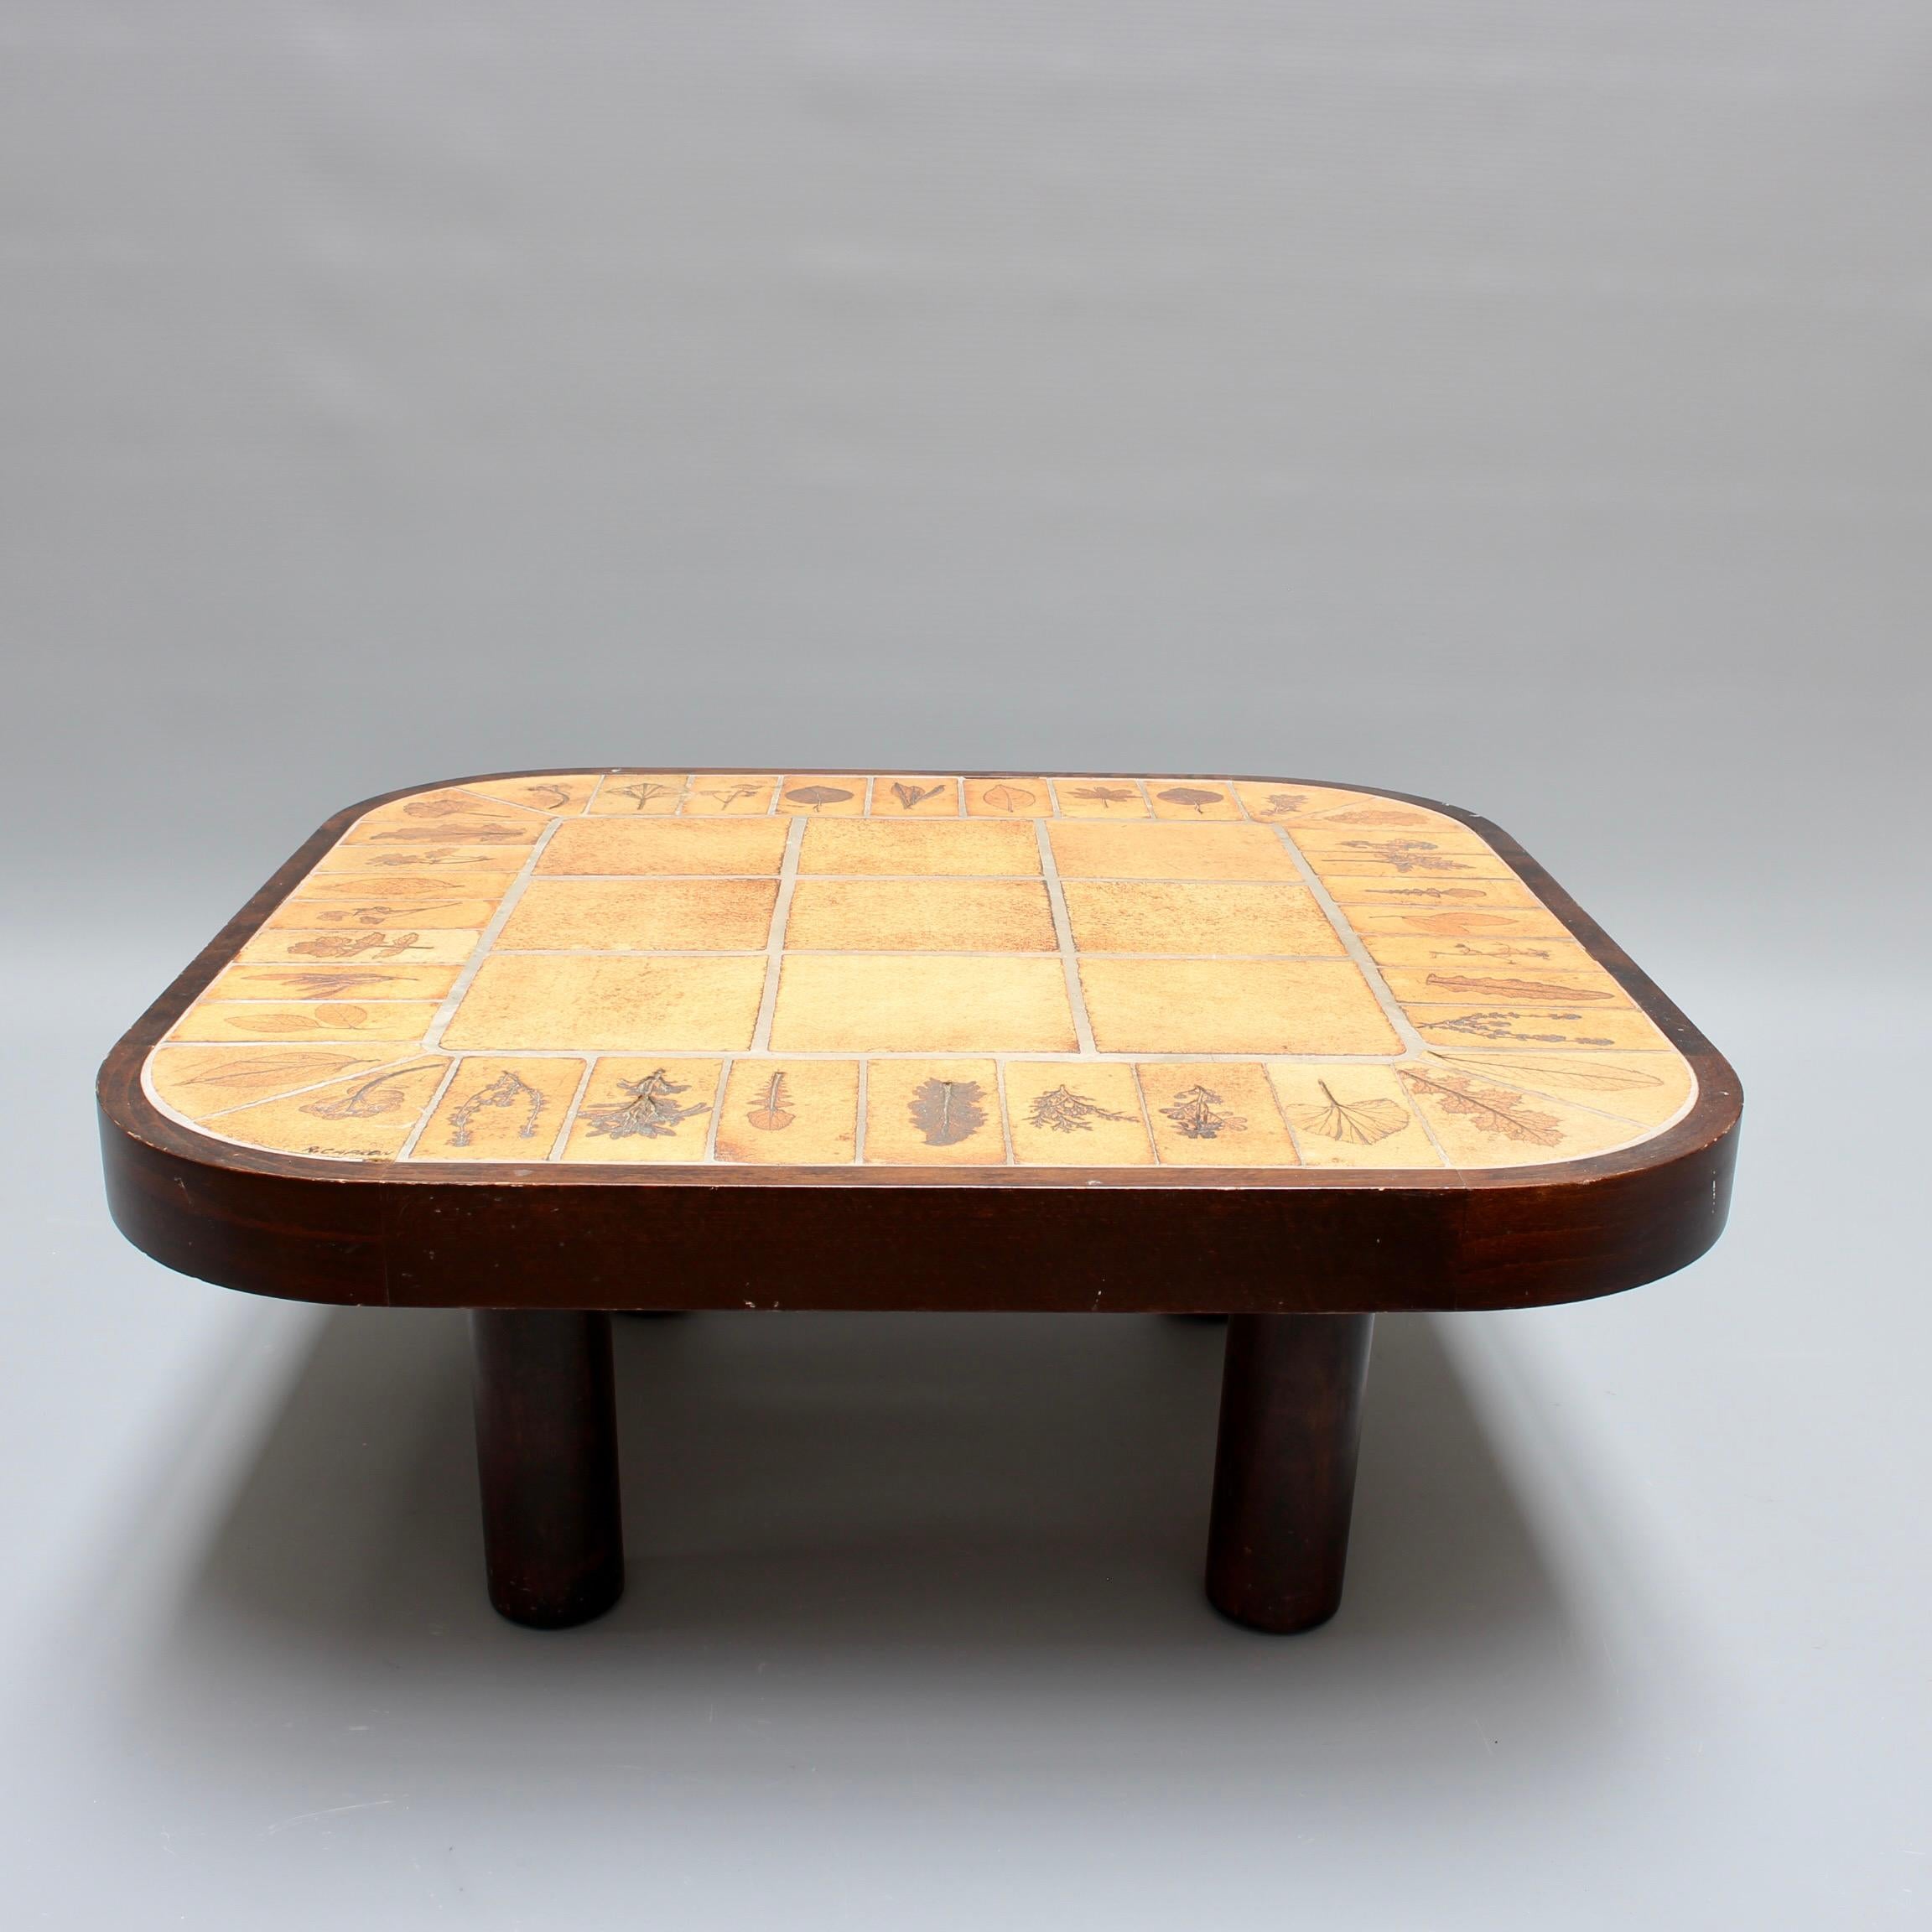 Ceramic Vintage French Rectangular Tiled Coffee Table by Roger Capron 'circa 1970s'